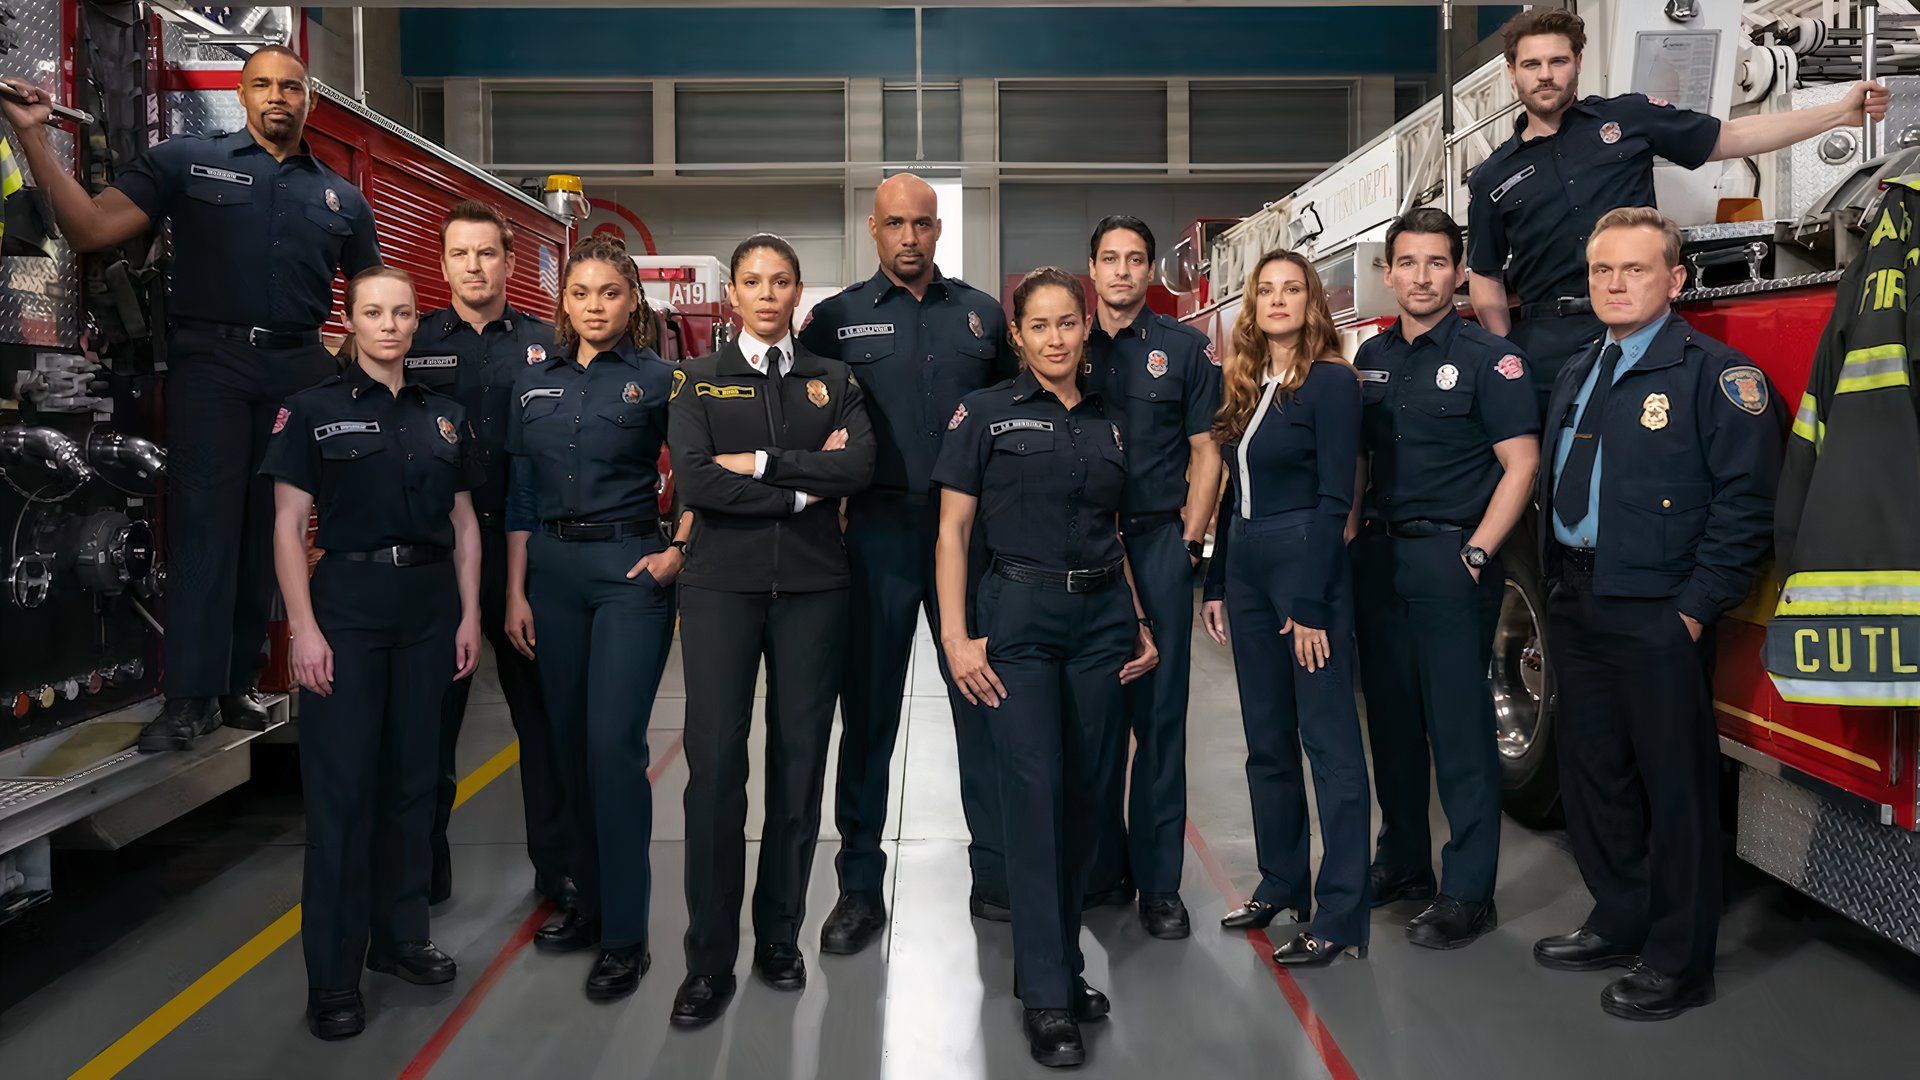 The crew poses together in Station 19